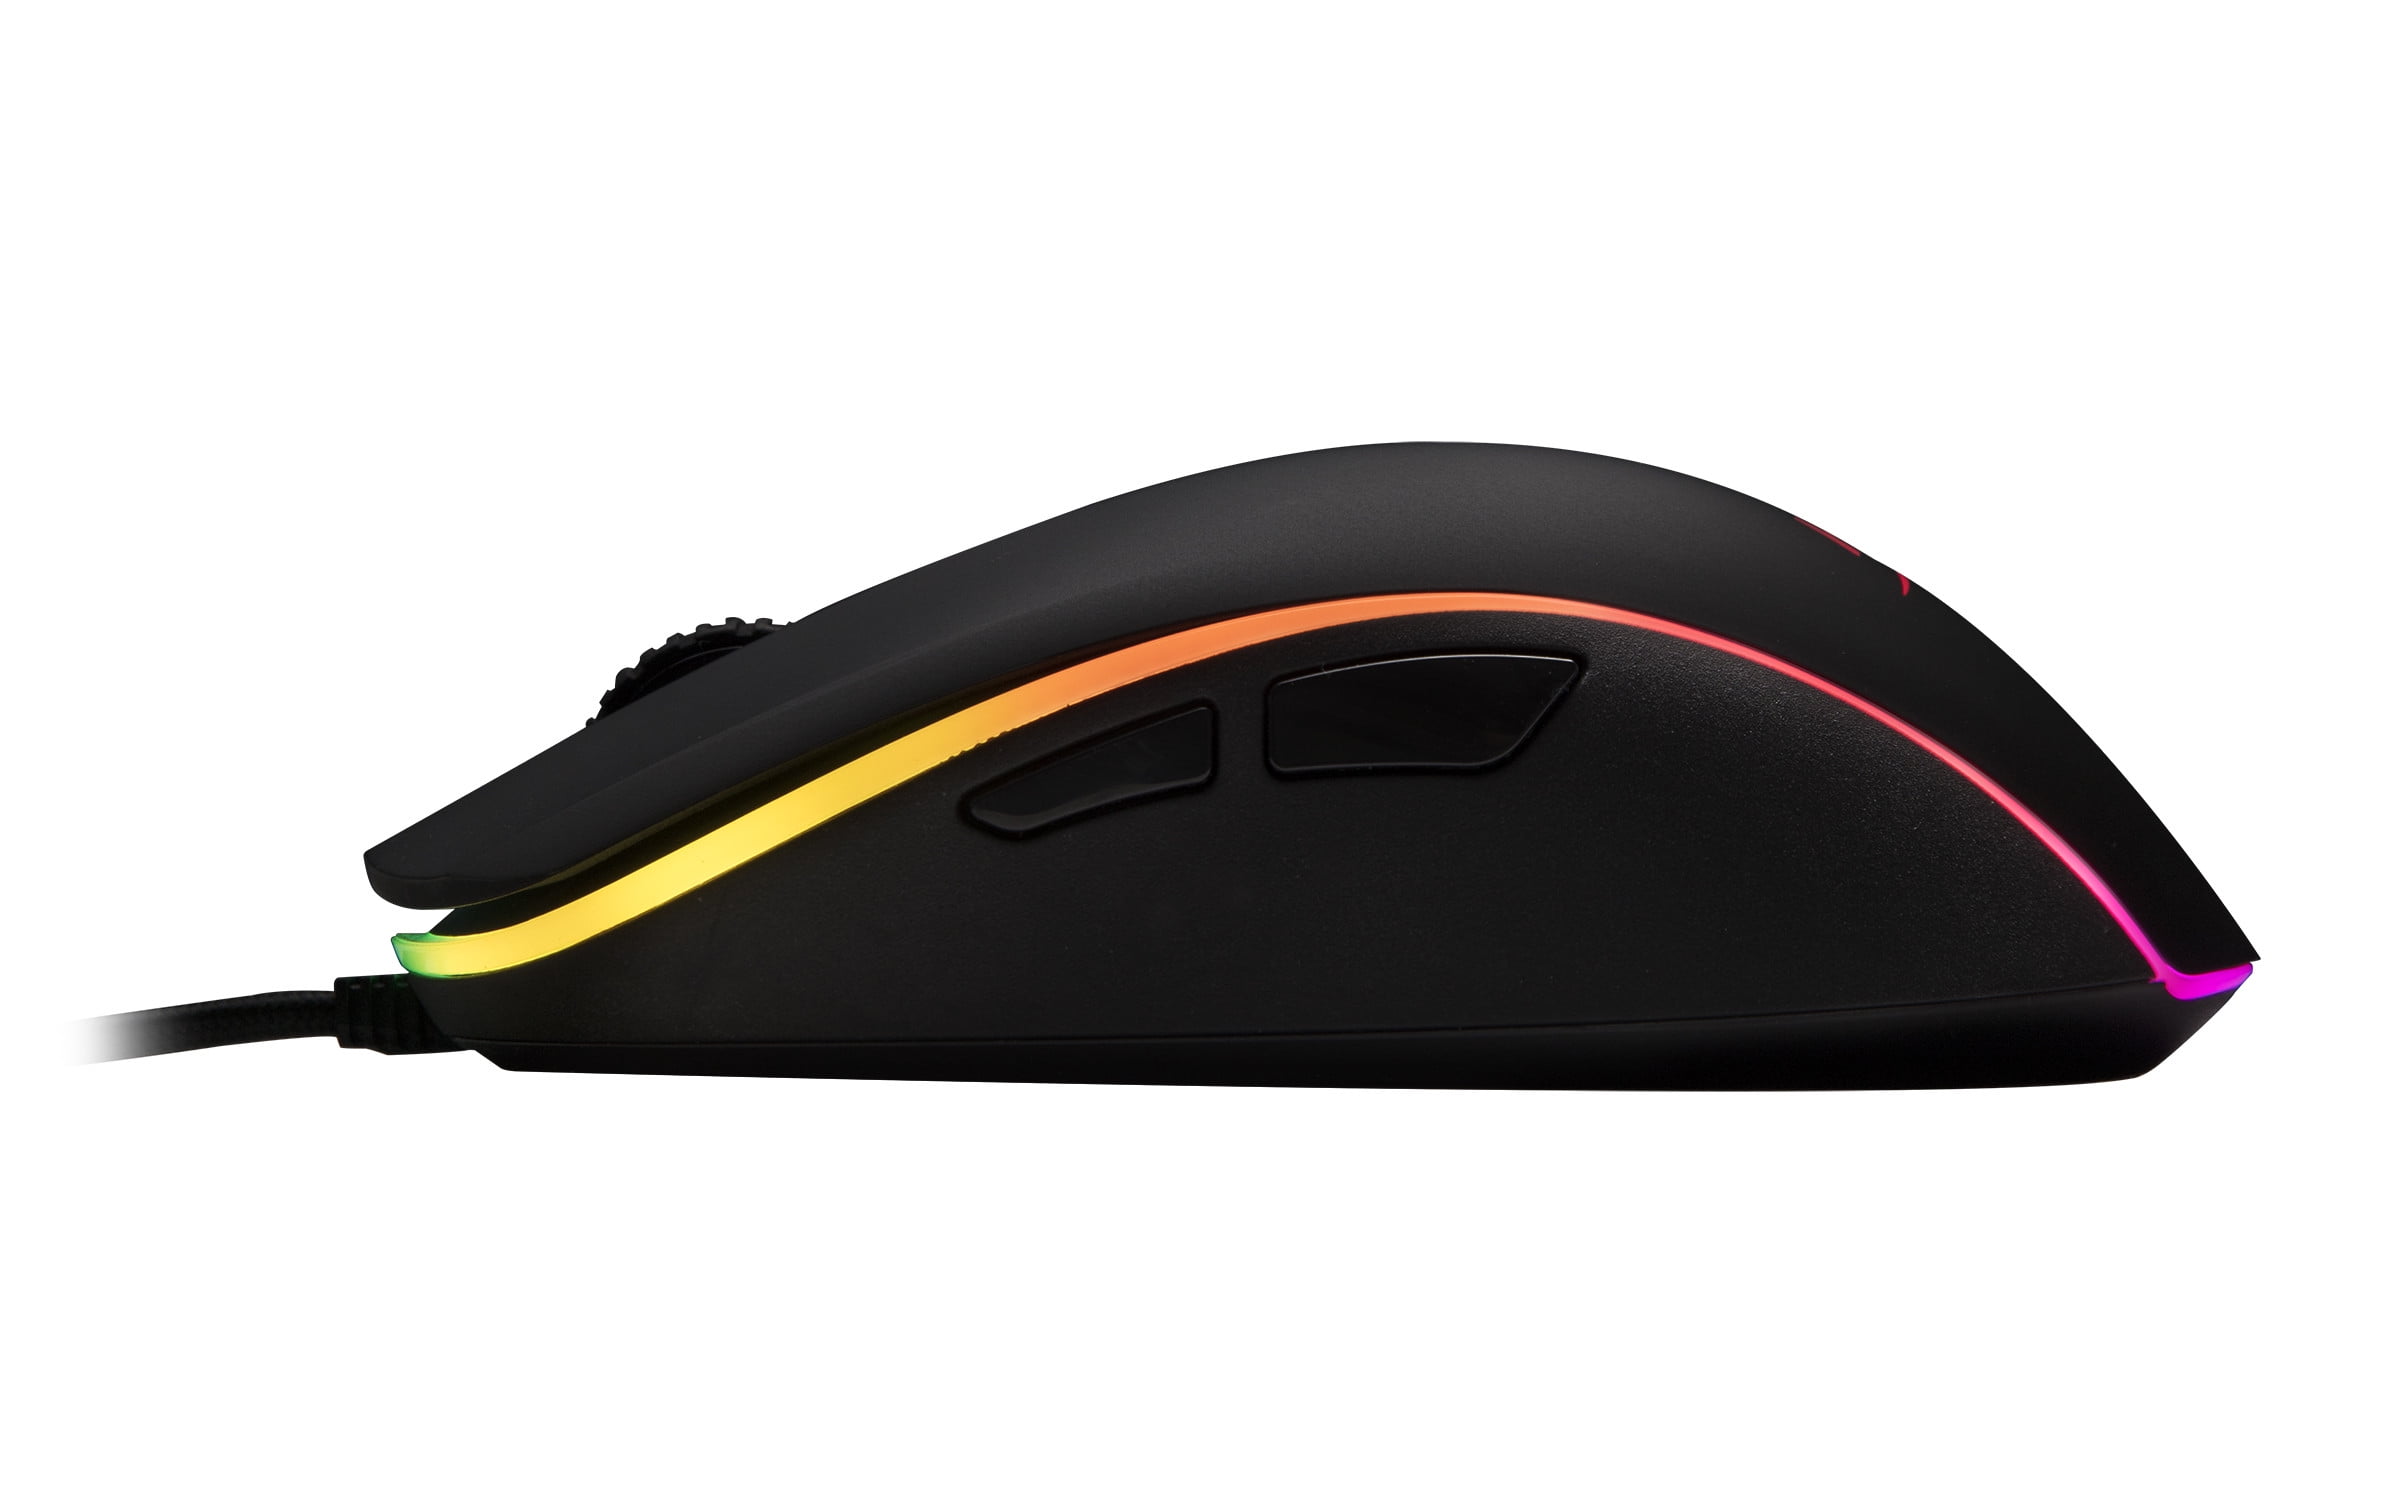 HyperX Pulsefire Gaming Surge Mouse RGB